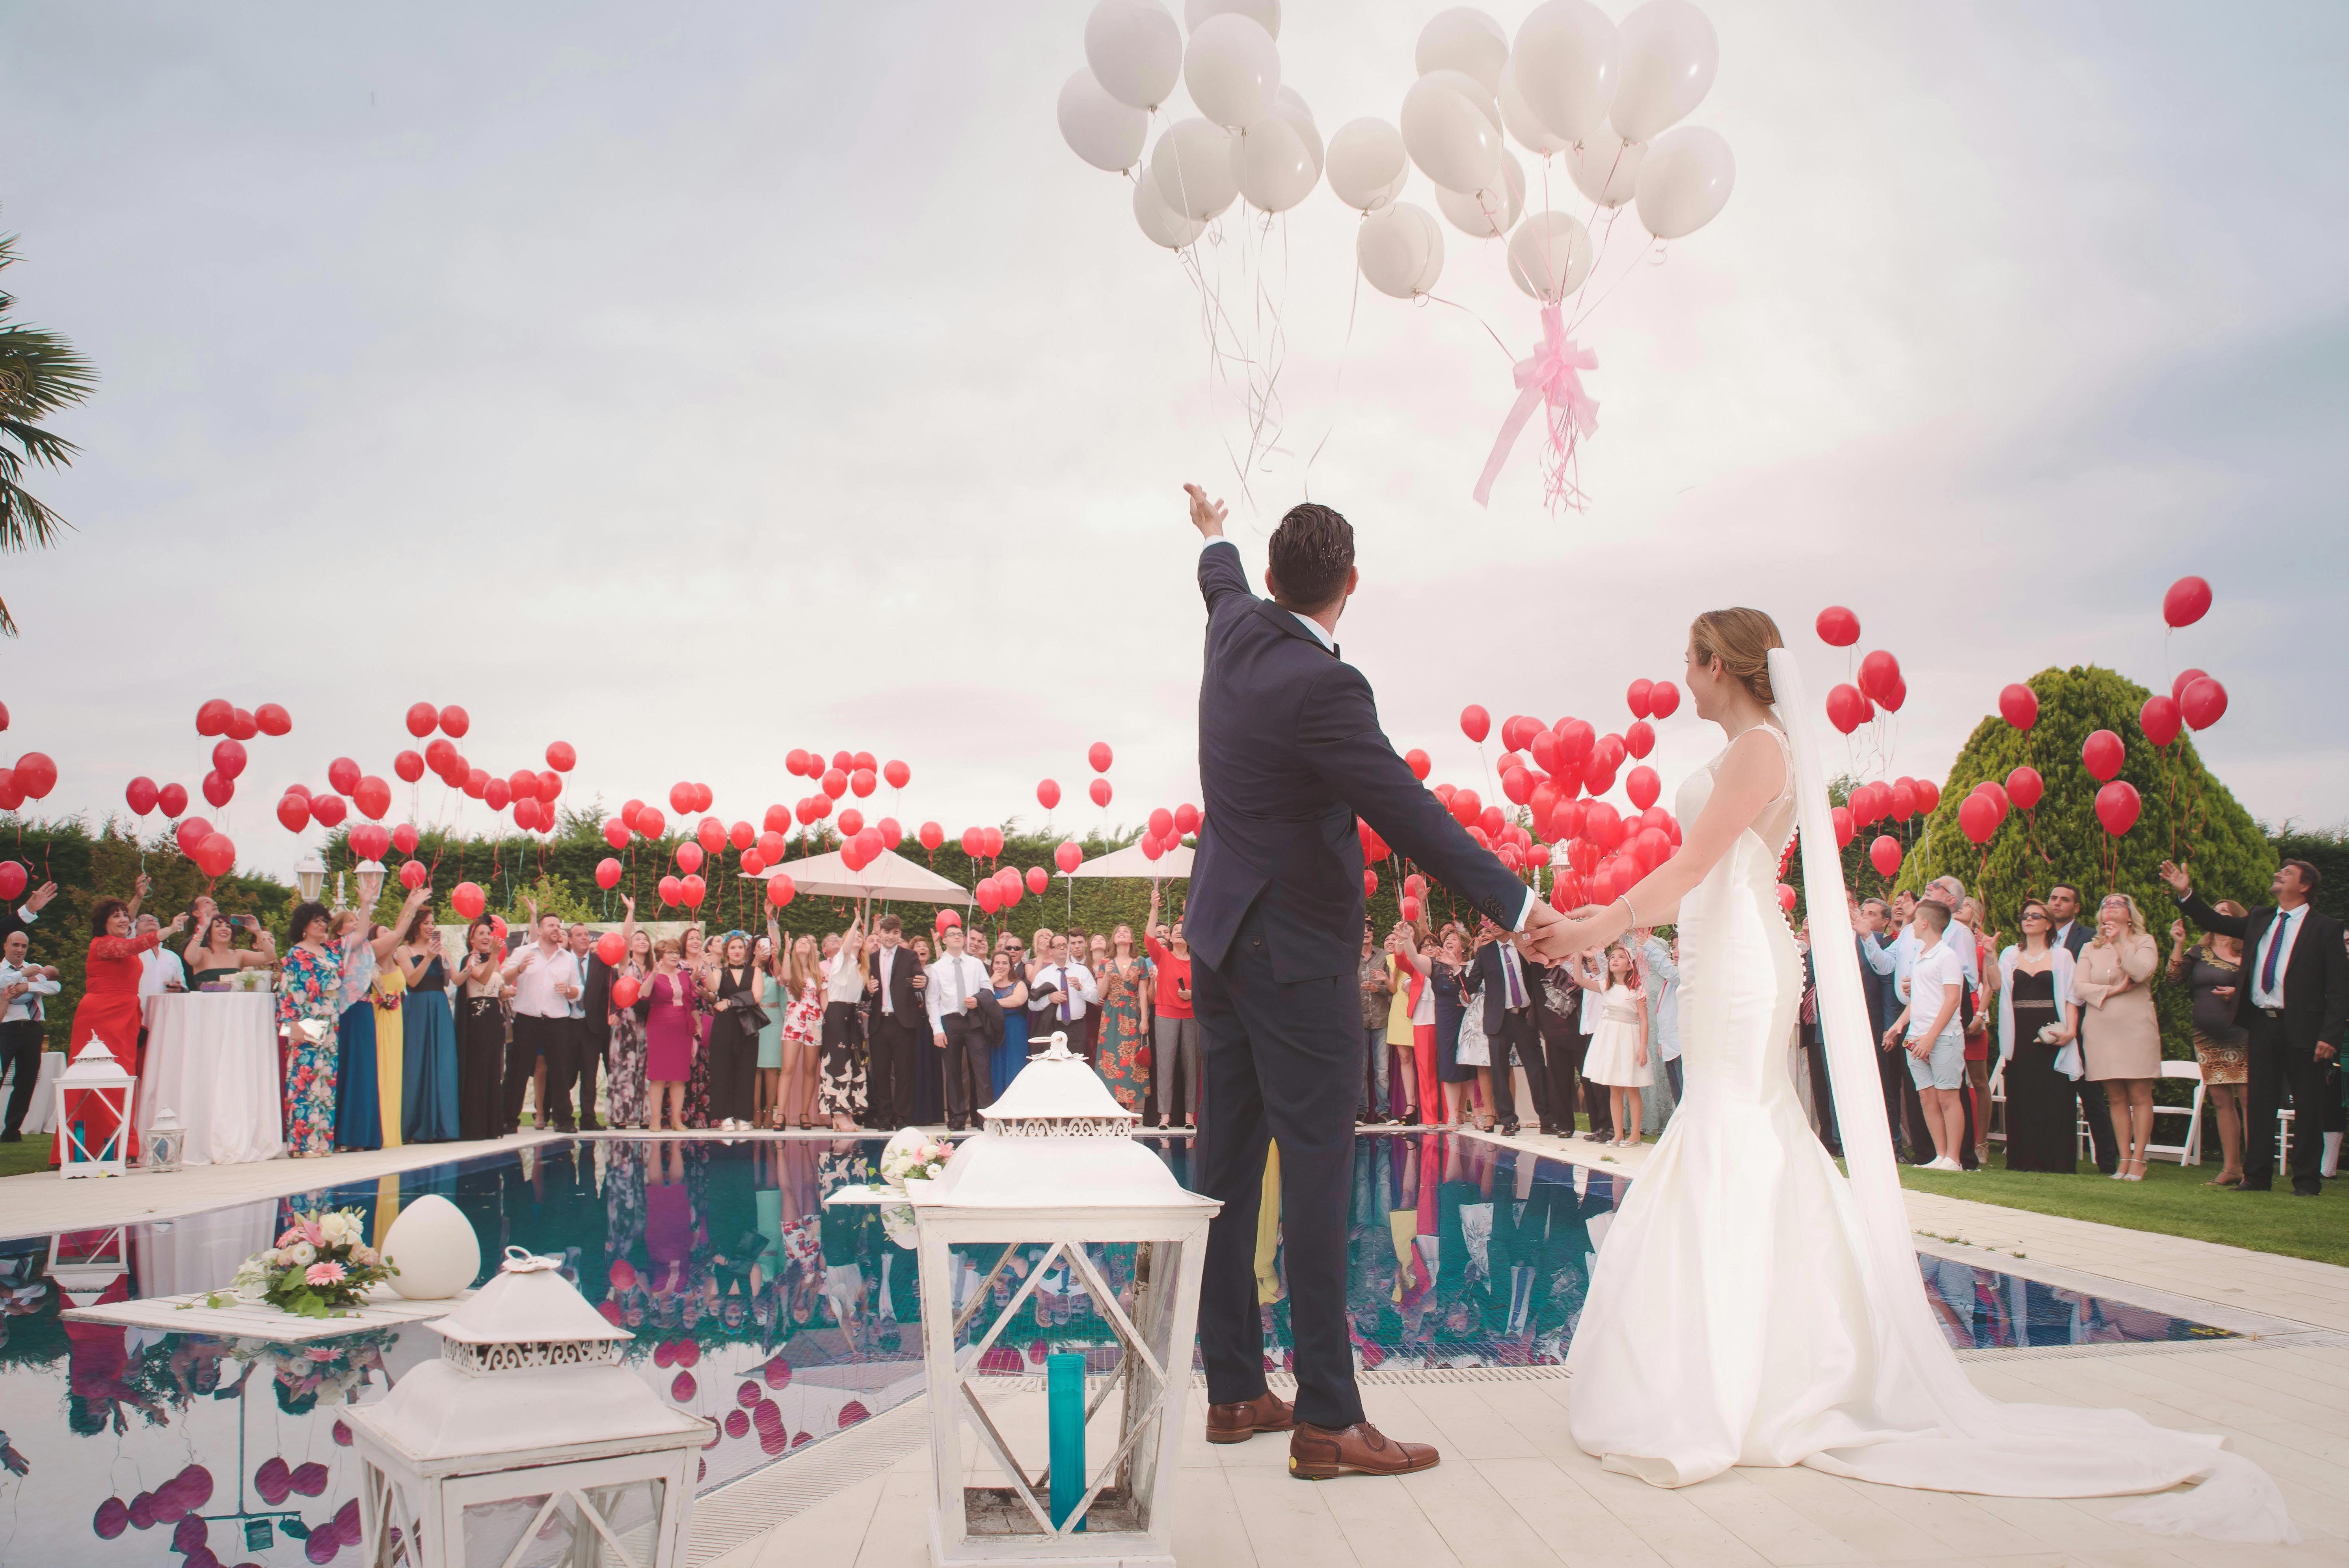 18 Fun Wedding Photo Ideas You’ll Want To Steal